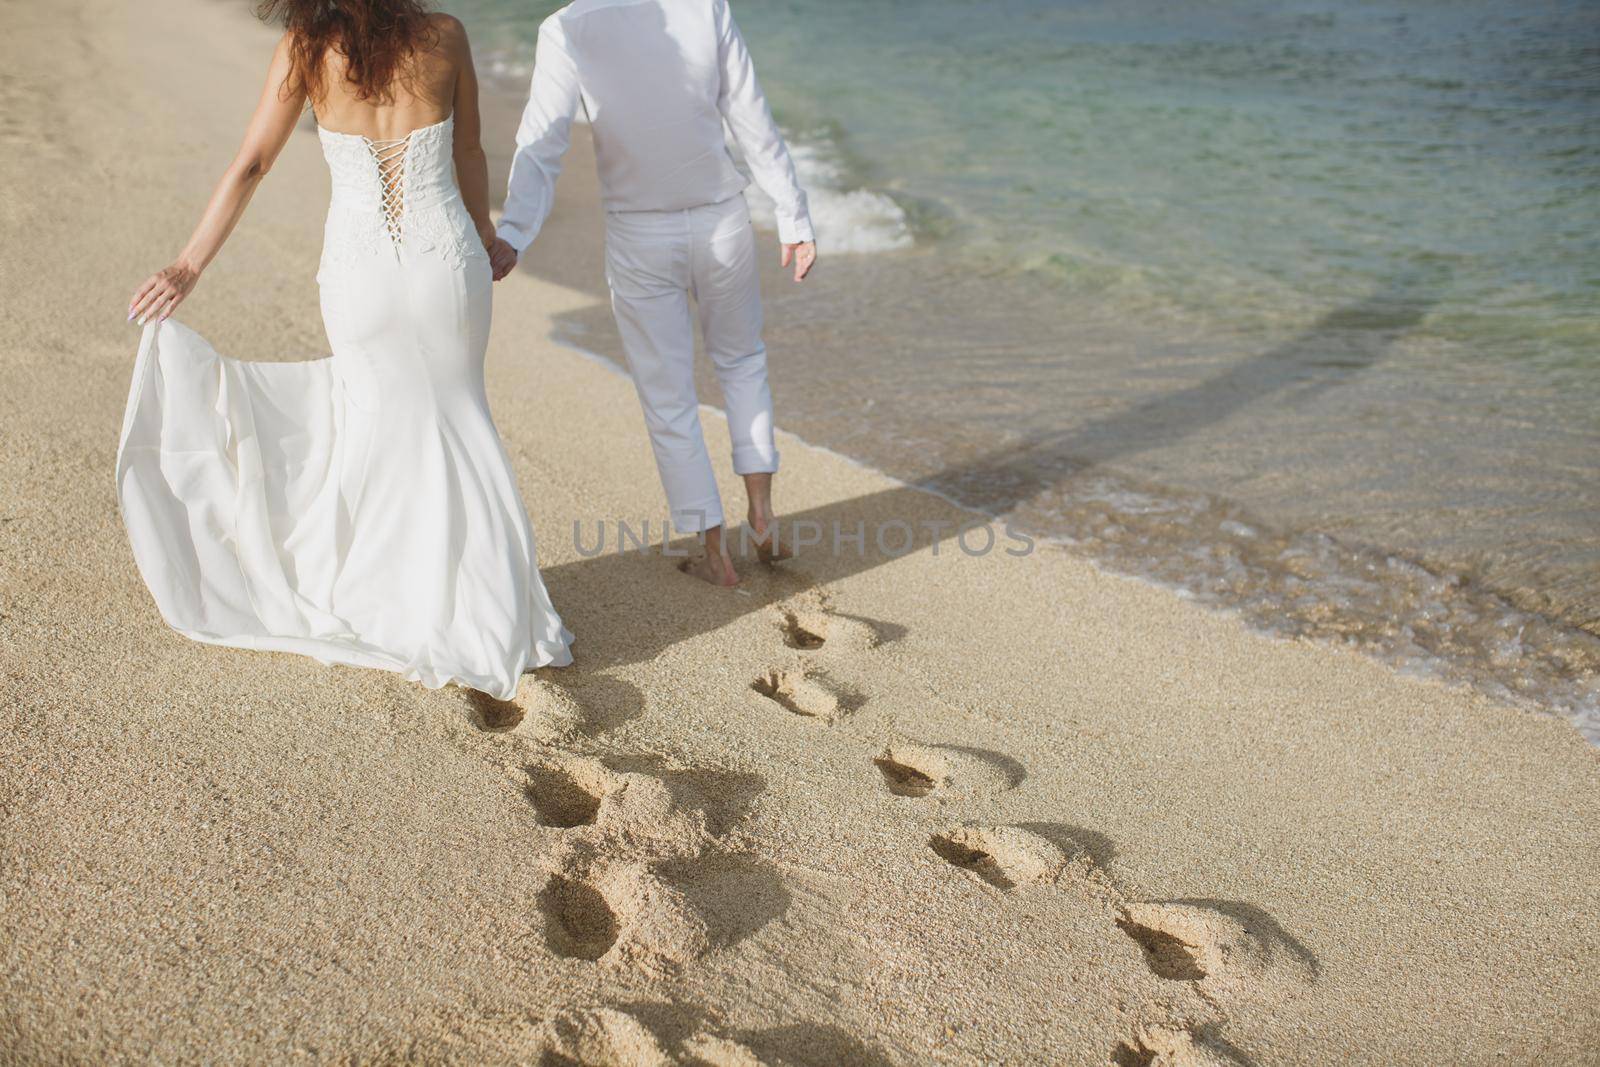 The bride and groom walk hand in the sand. footprints in the sand near the ocean